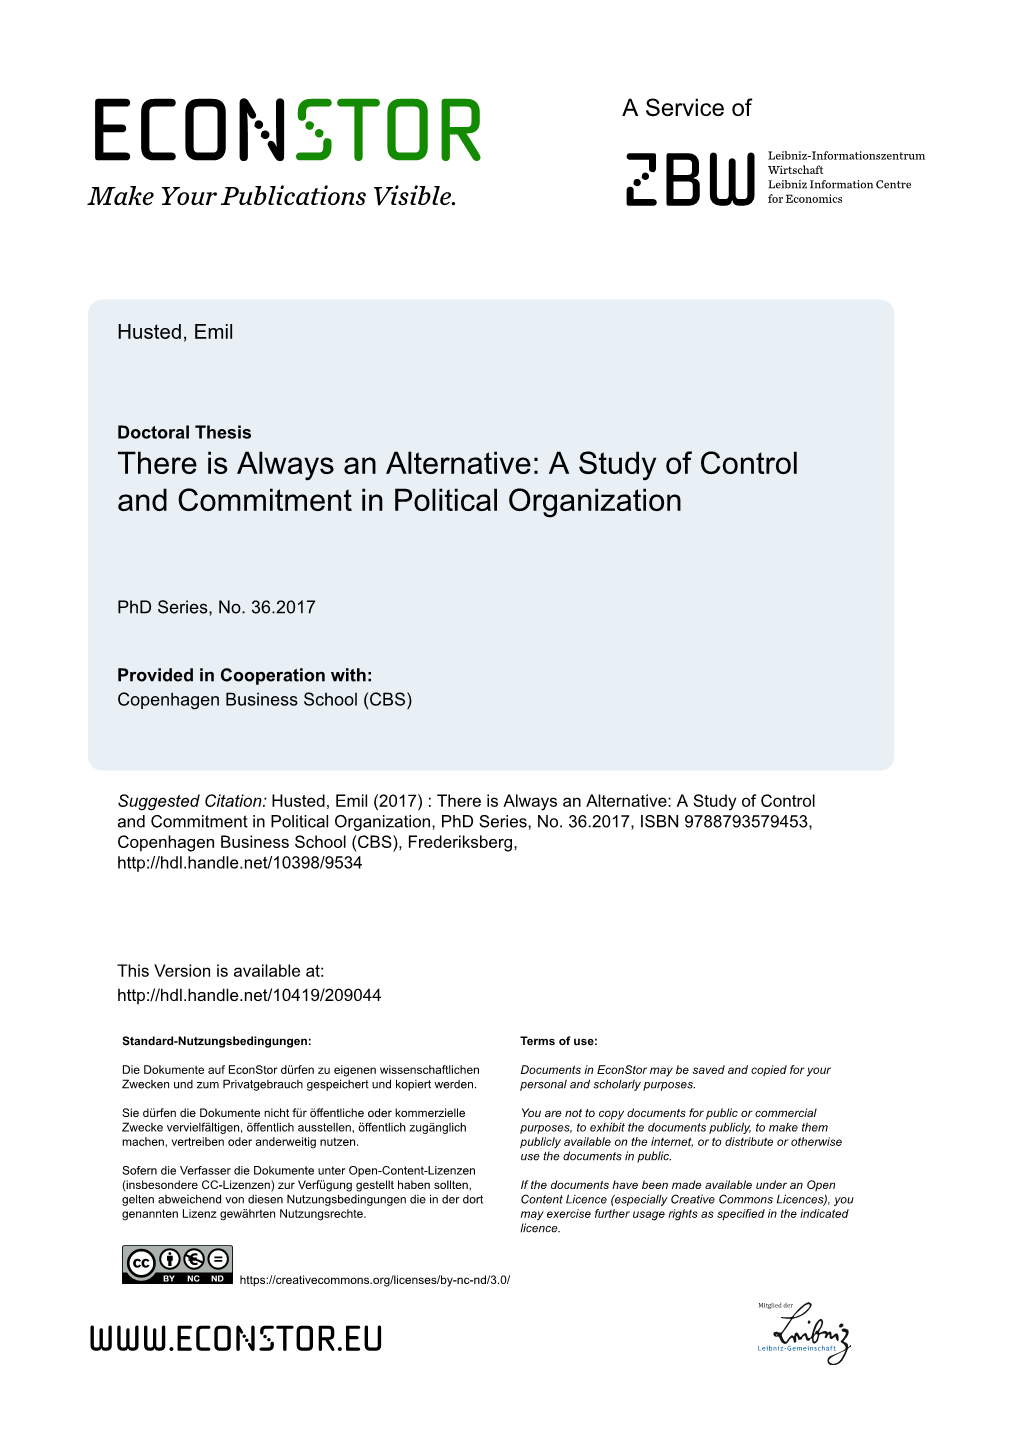 There Is Always an Alternative: a Study of Control and Commitment in Political Organization